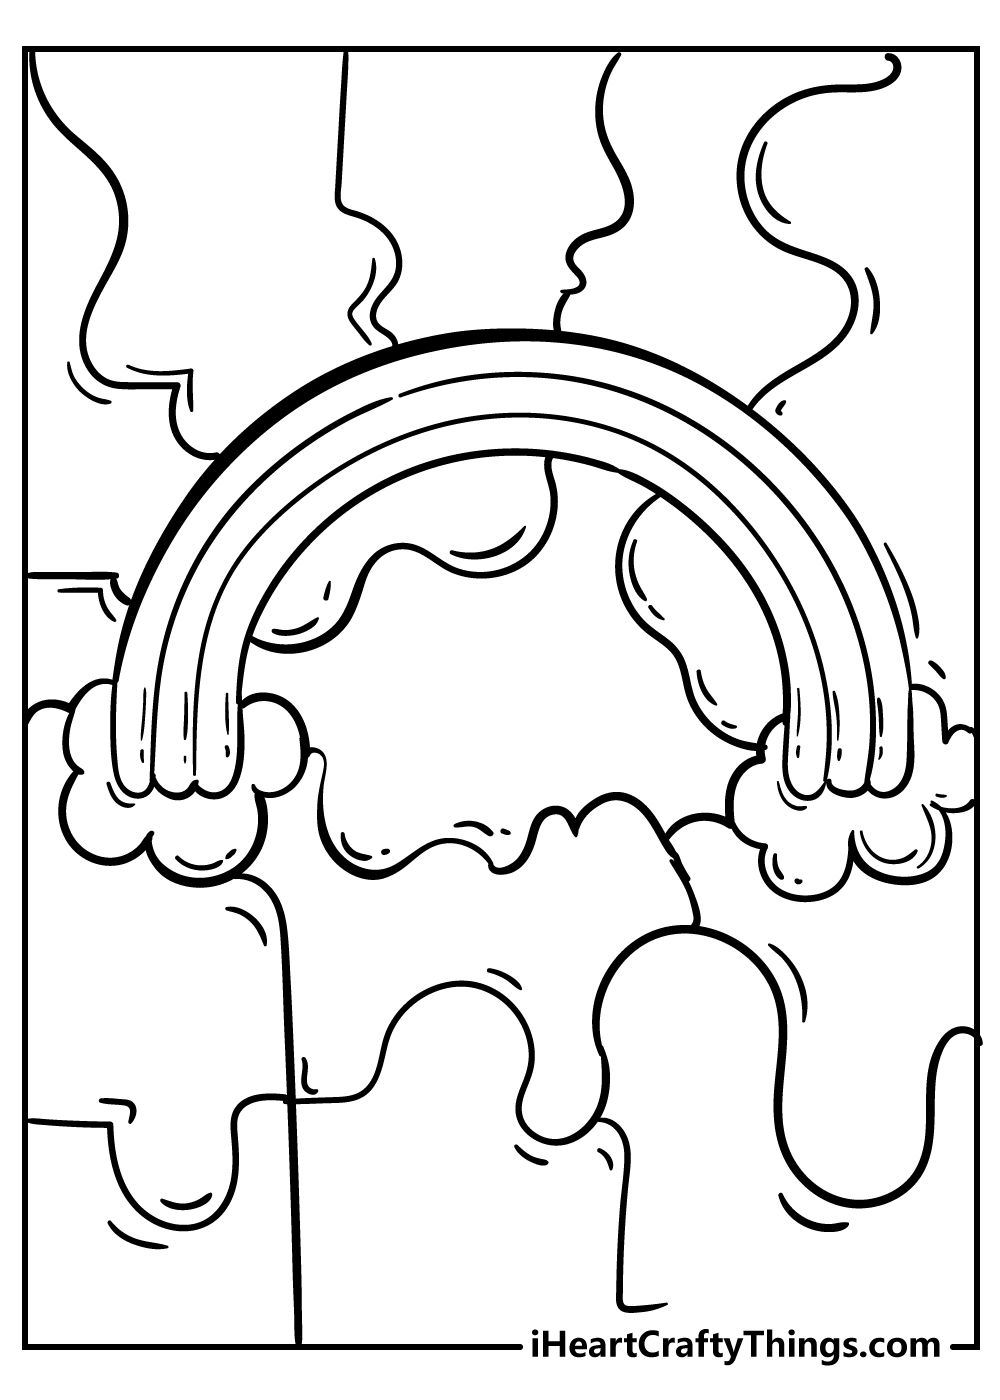 rainbow coloring sheet for children free download